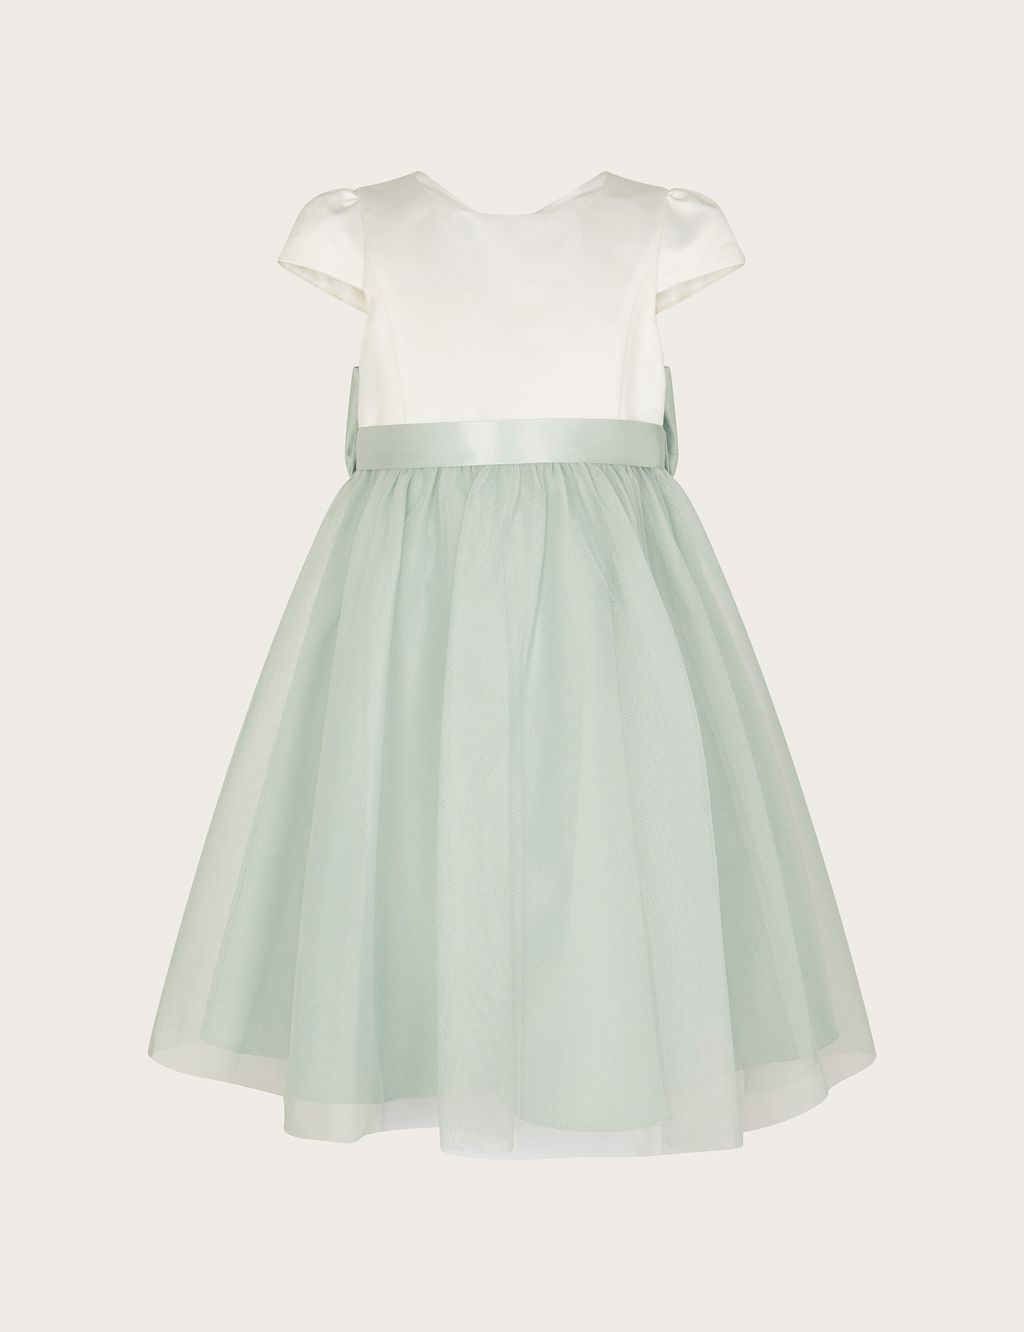 Tulle Occasion Dress (3-13 Yrs) image 1